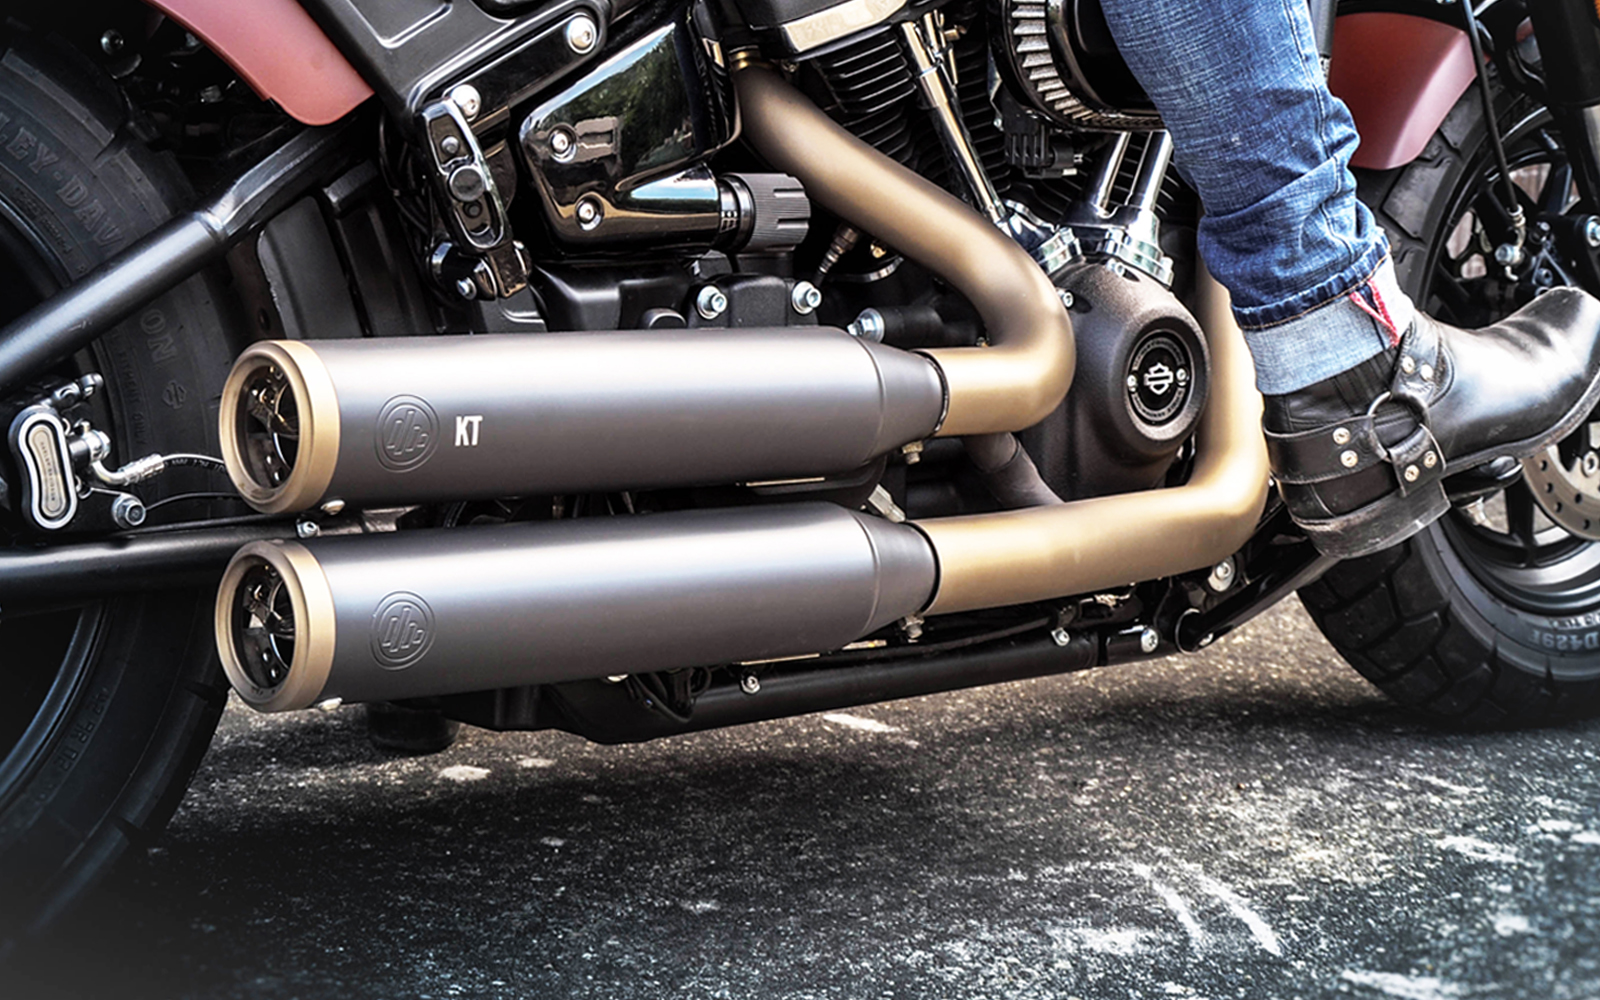 The Best Sounding Harley Davidson Exhausts In 2022 - Bikes Future